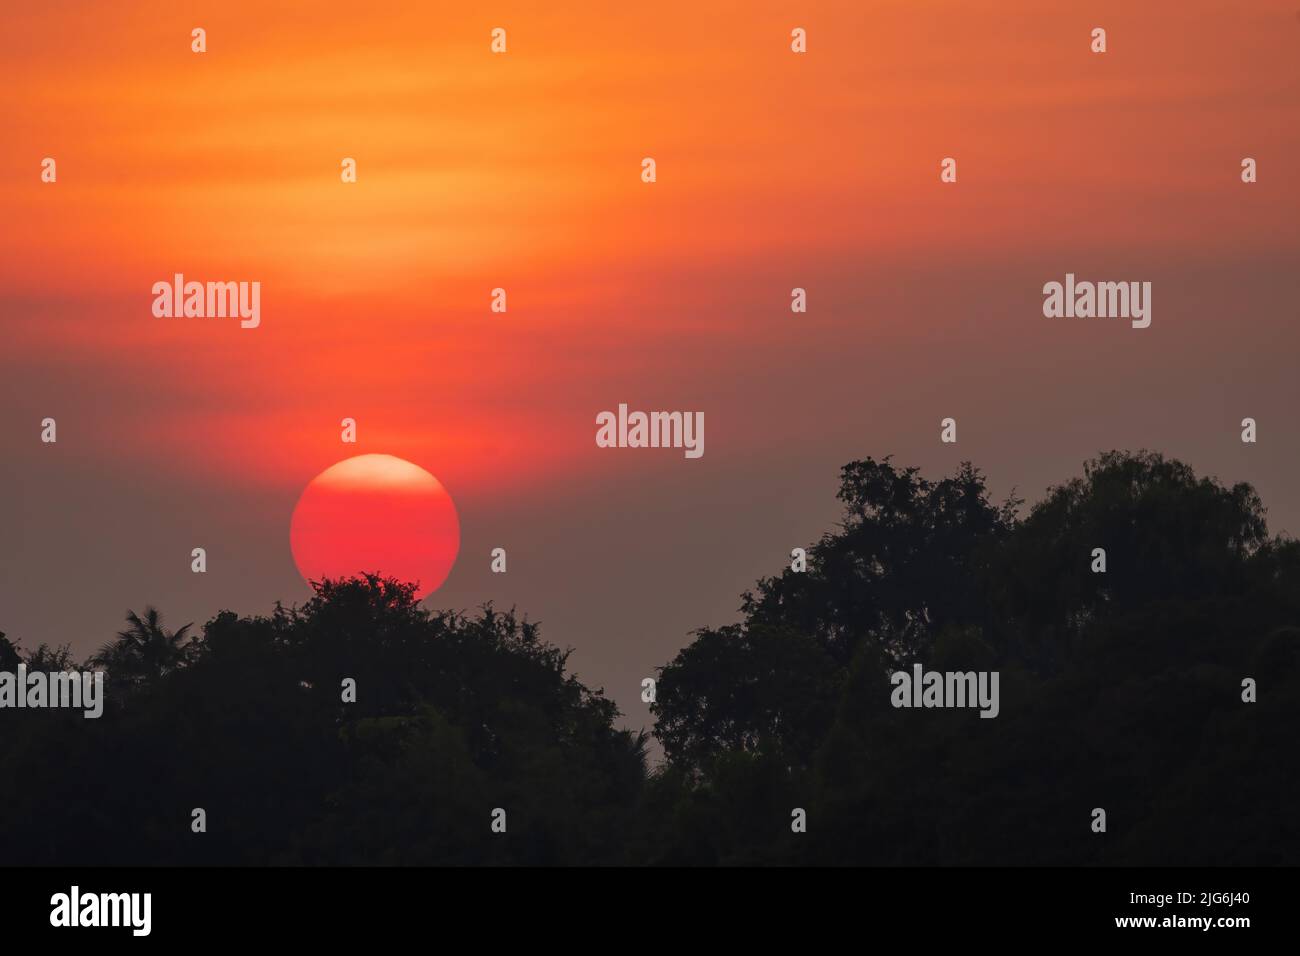 Intense red tropical sunset behind silhouetted trees. Stock Photo